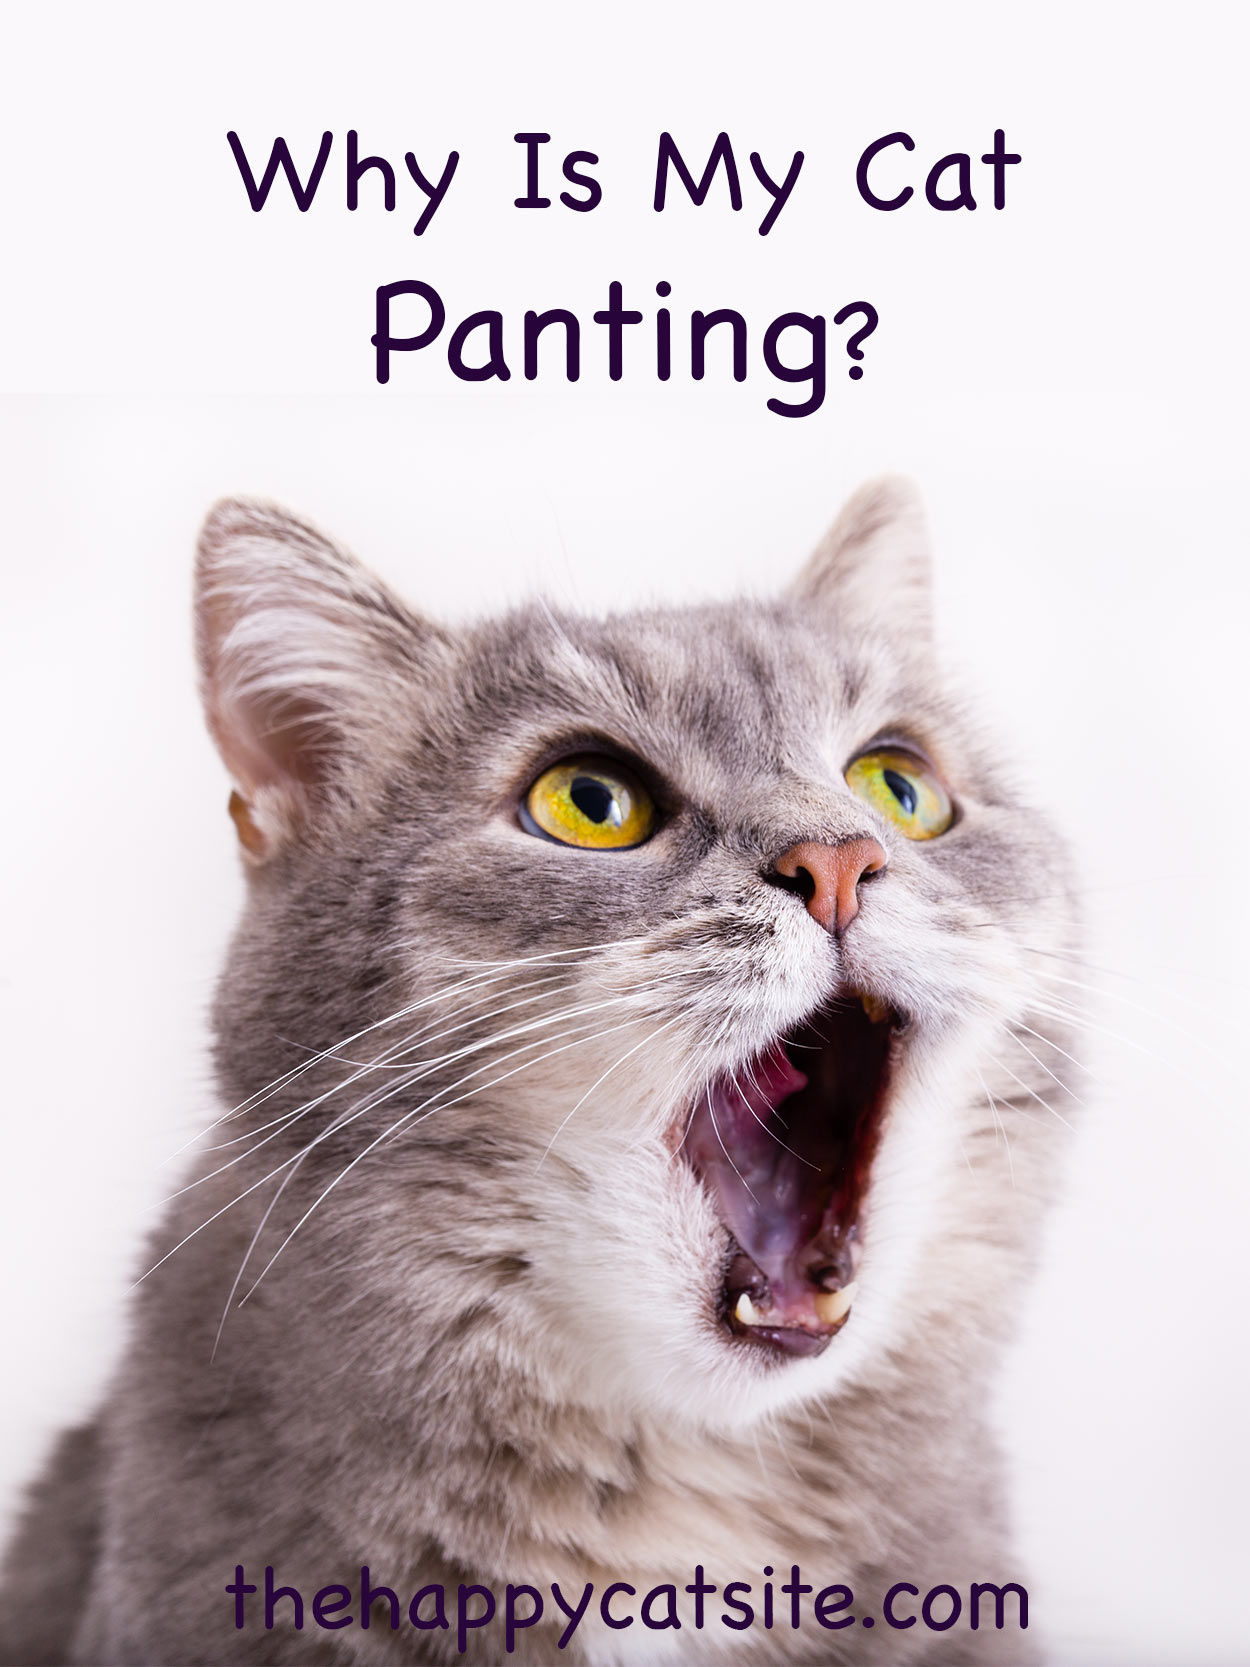 Heavy Breathing Cat - Why Is My Cat Panting or Breathing Fast?
 Heavy Breathing Cat Picture